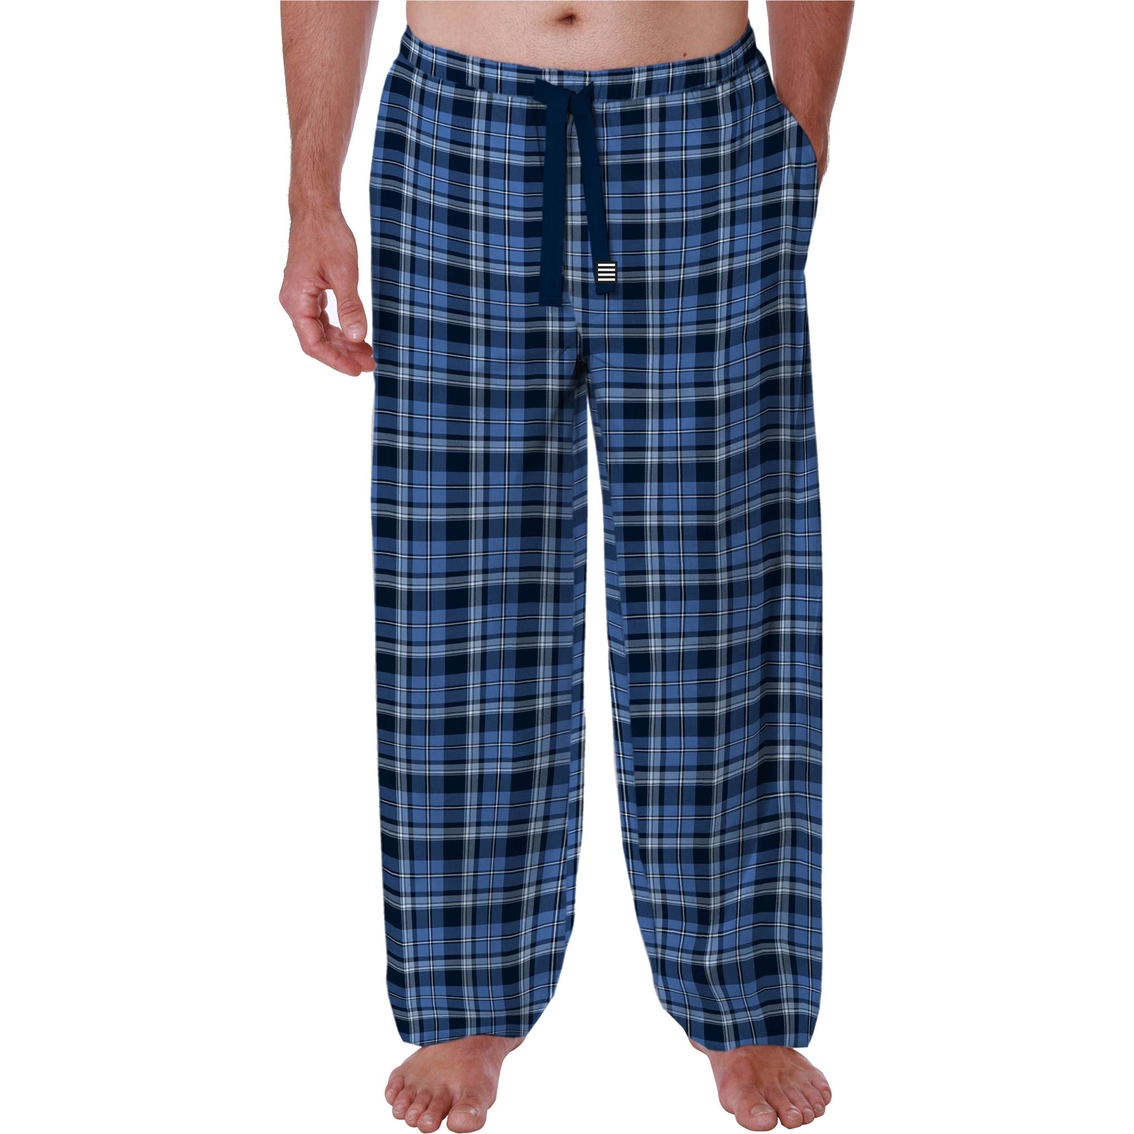 Geoffrey Beene Flannel Pants | Pajamas & Robes | Father's Day Shop ...